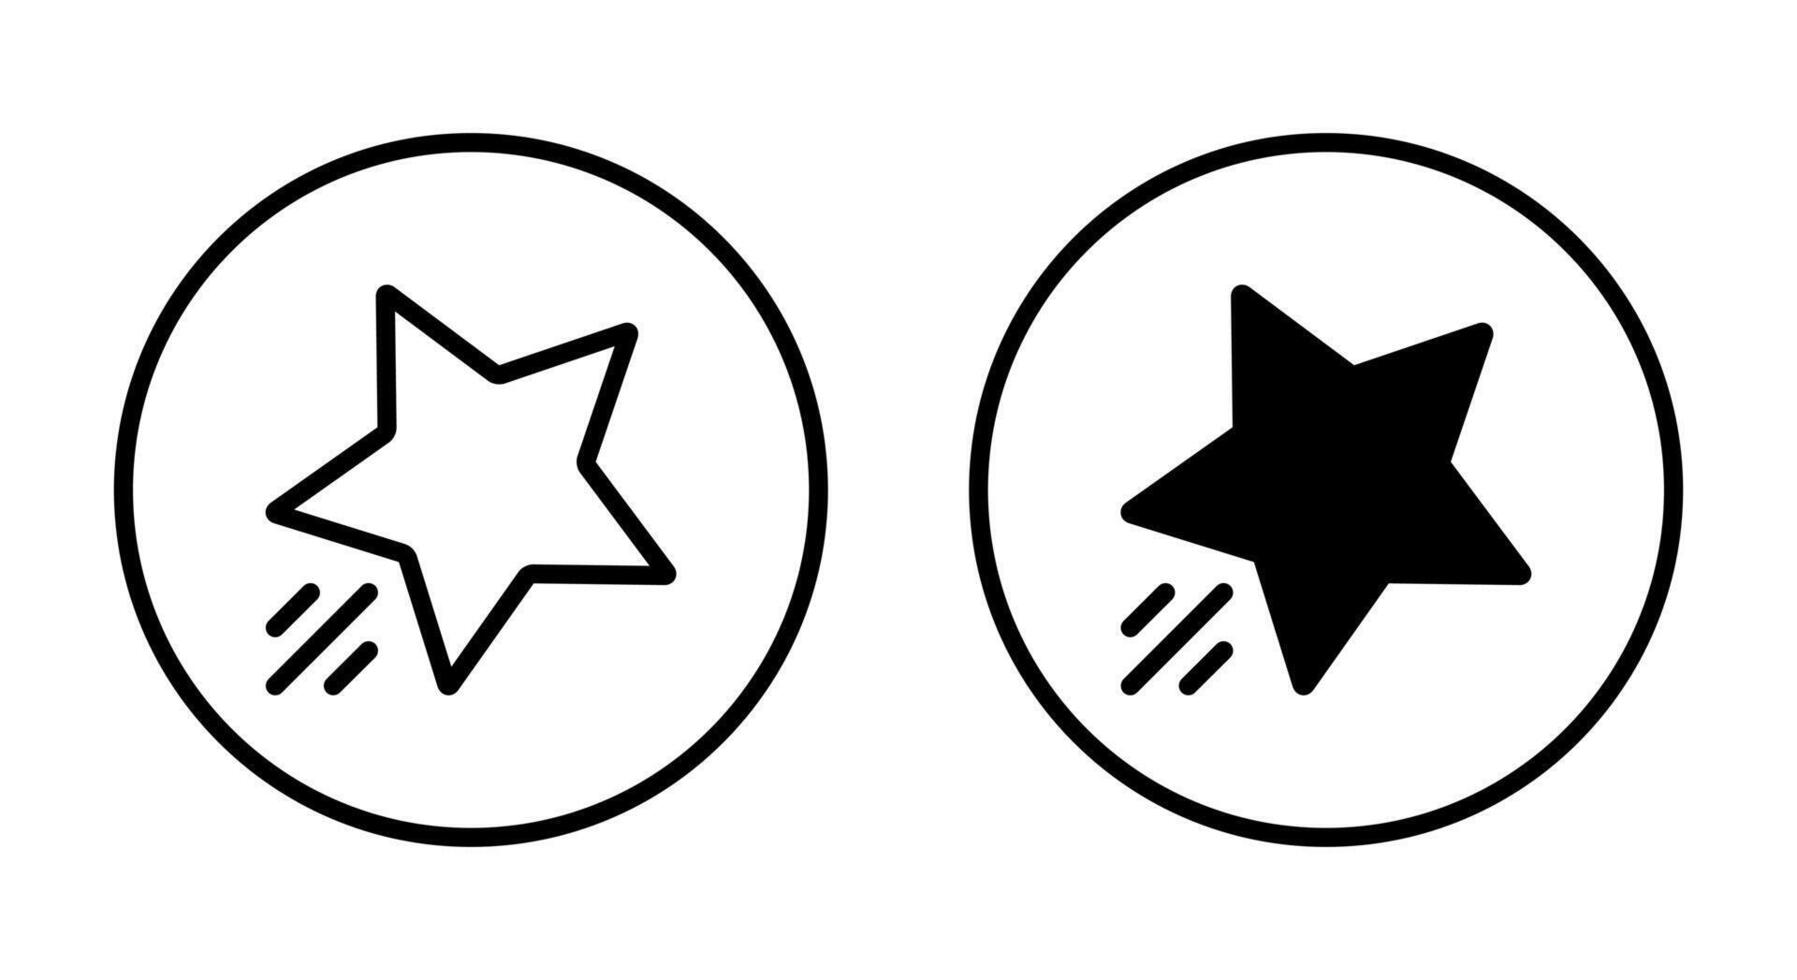 Fast star icon on circle line. Send gift concept vector